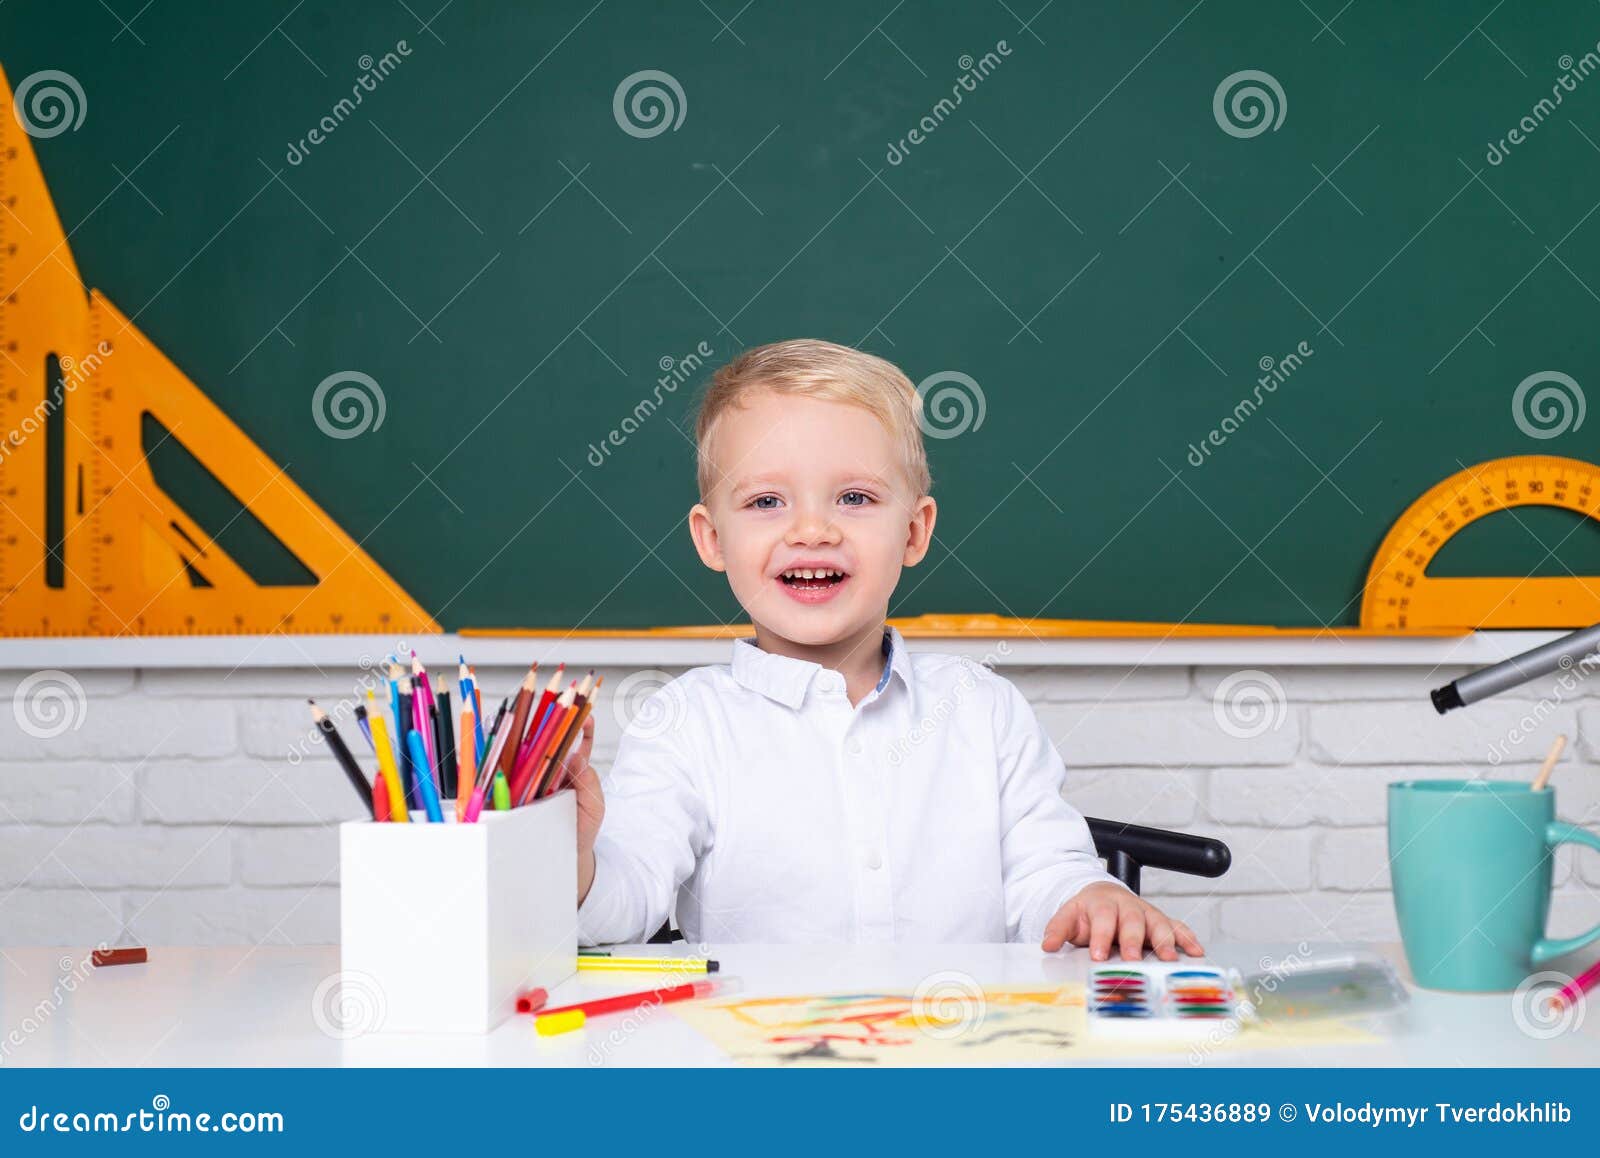 Cute Pupil with Funny Face Schooling Work. Cute Little Preschool ...